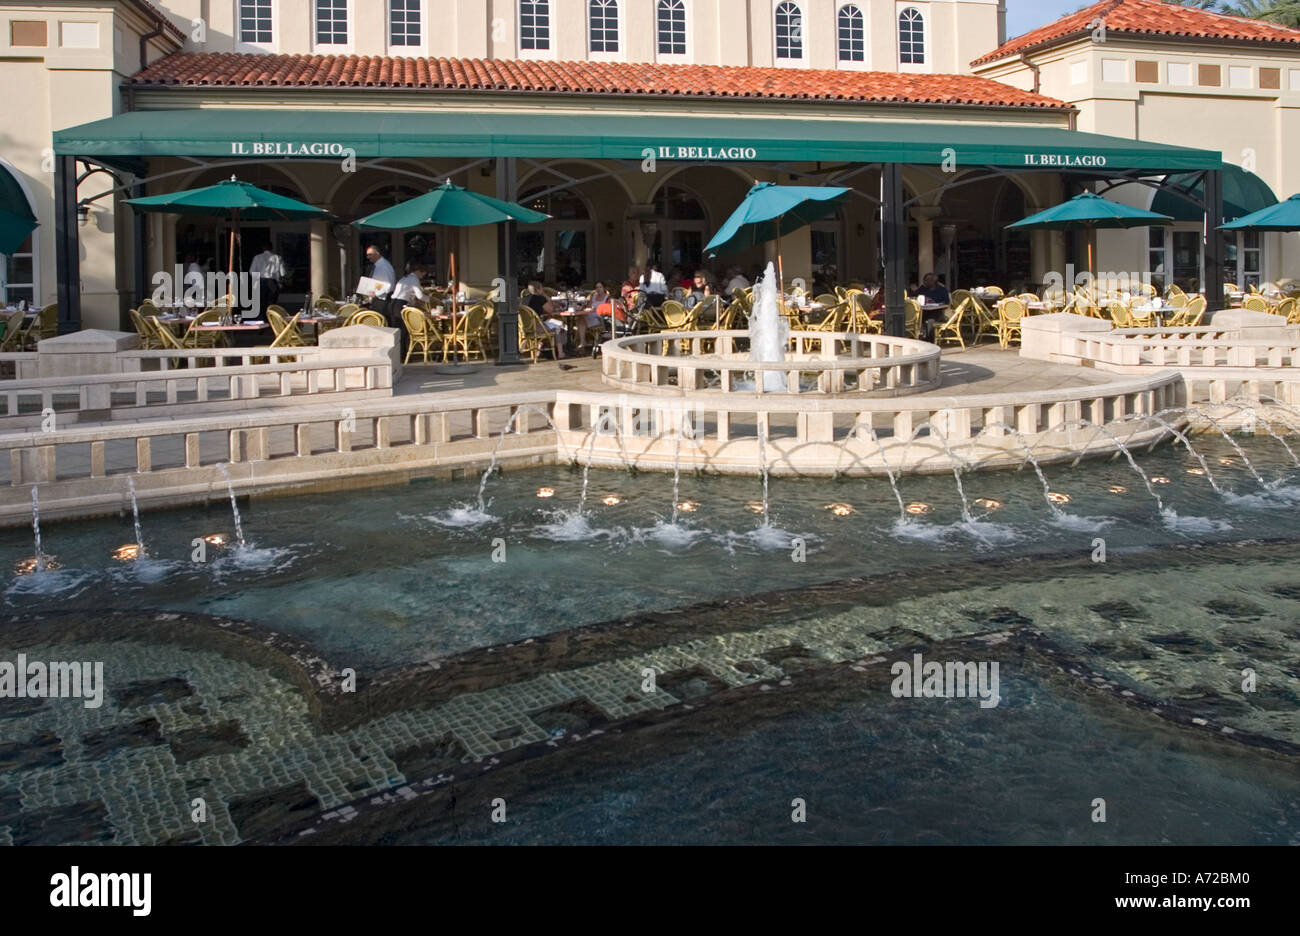 Fountain in front of Il Bellagio restaurant City Place West Palm Beach Florida Stock Photo